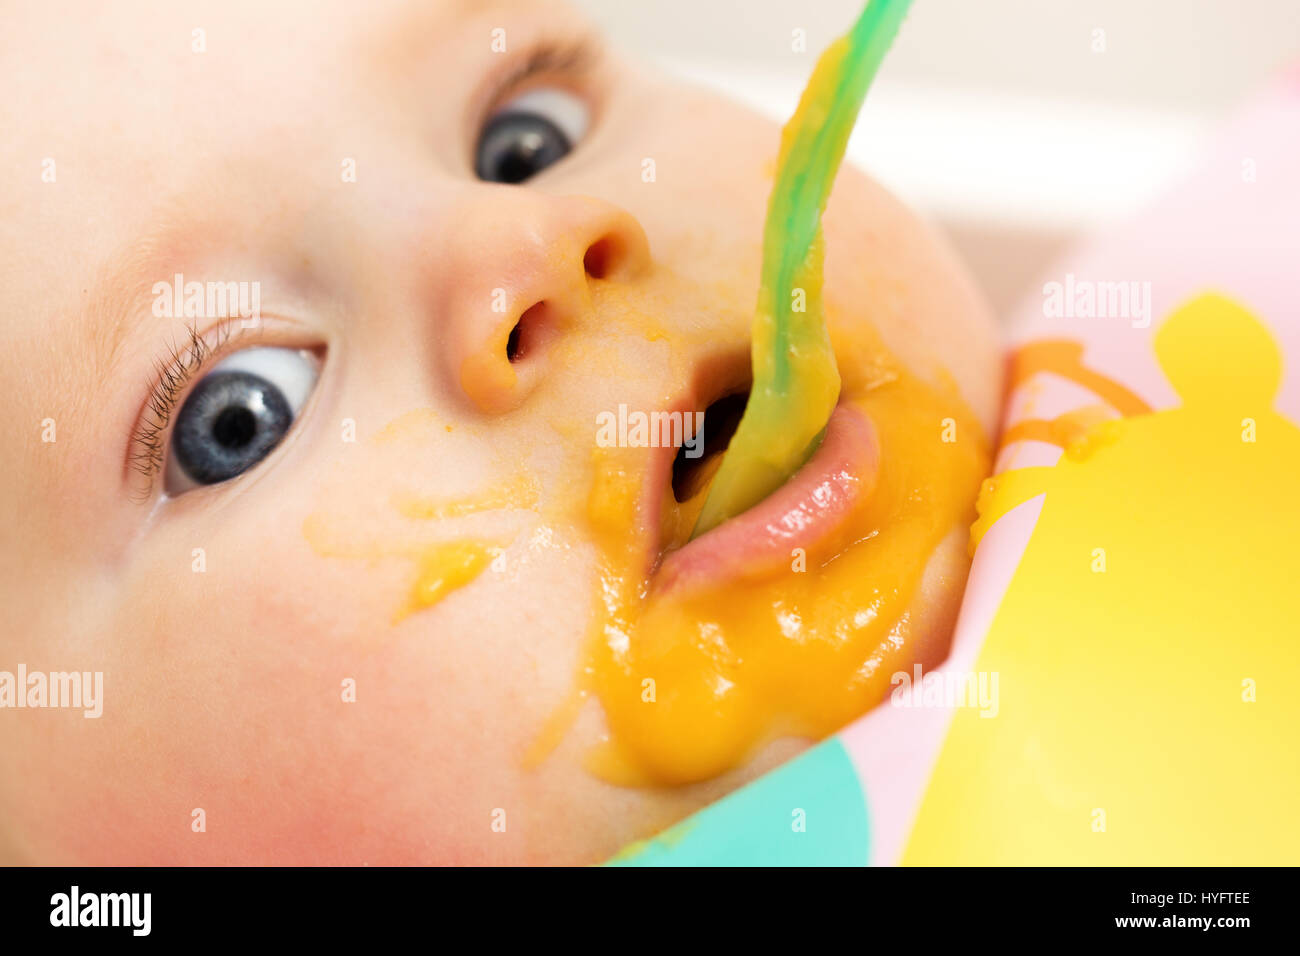 funny closeup of feeding baby with vegetable puree Stock Photo